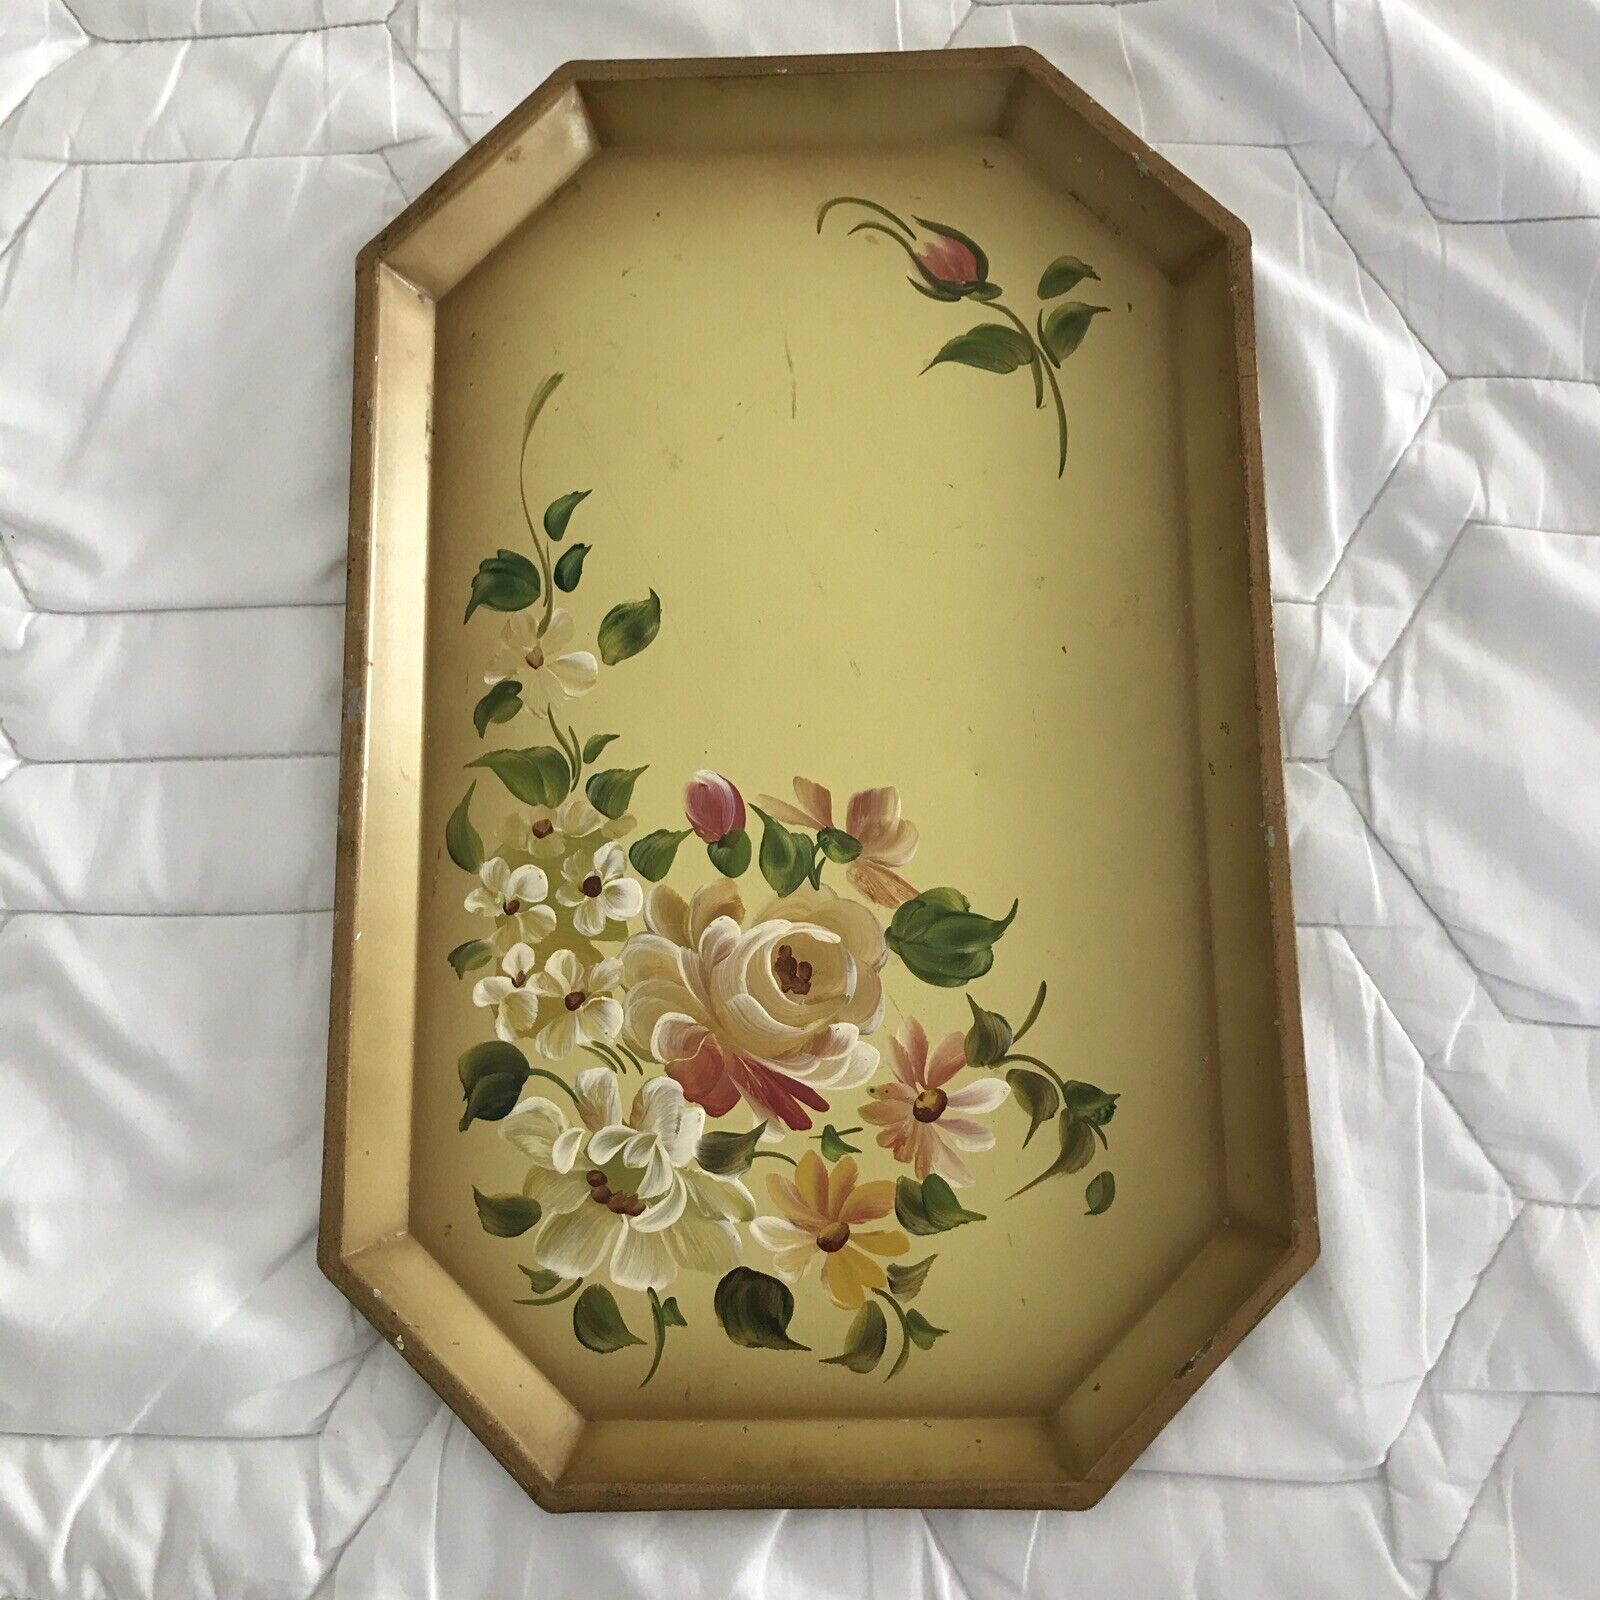 NASH CO HandPainted Metal Serving Tray Toleware 8 Sided Yellow FLORAL  Vintage